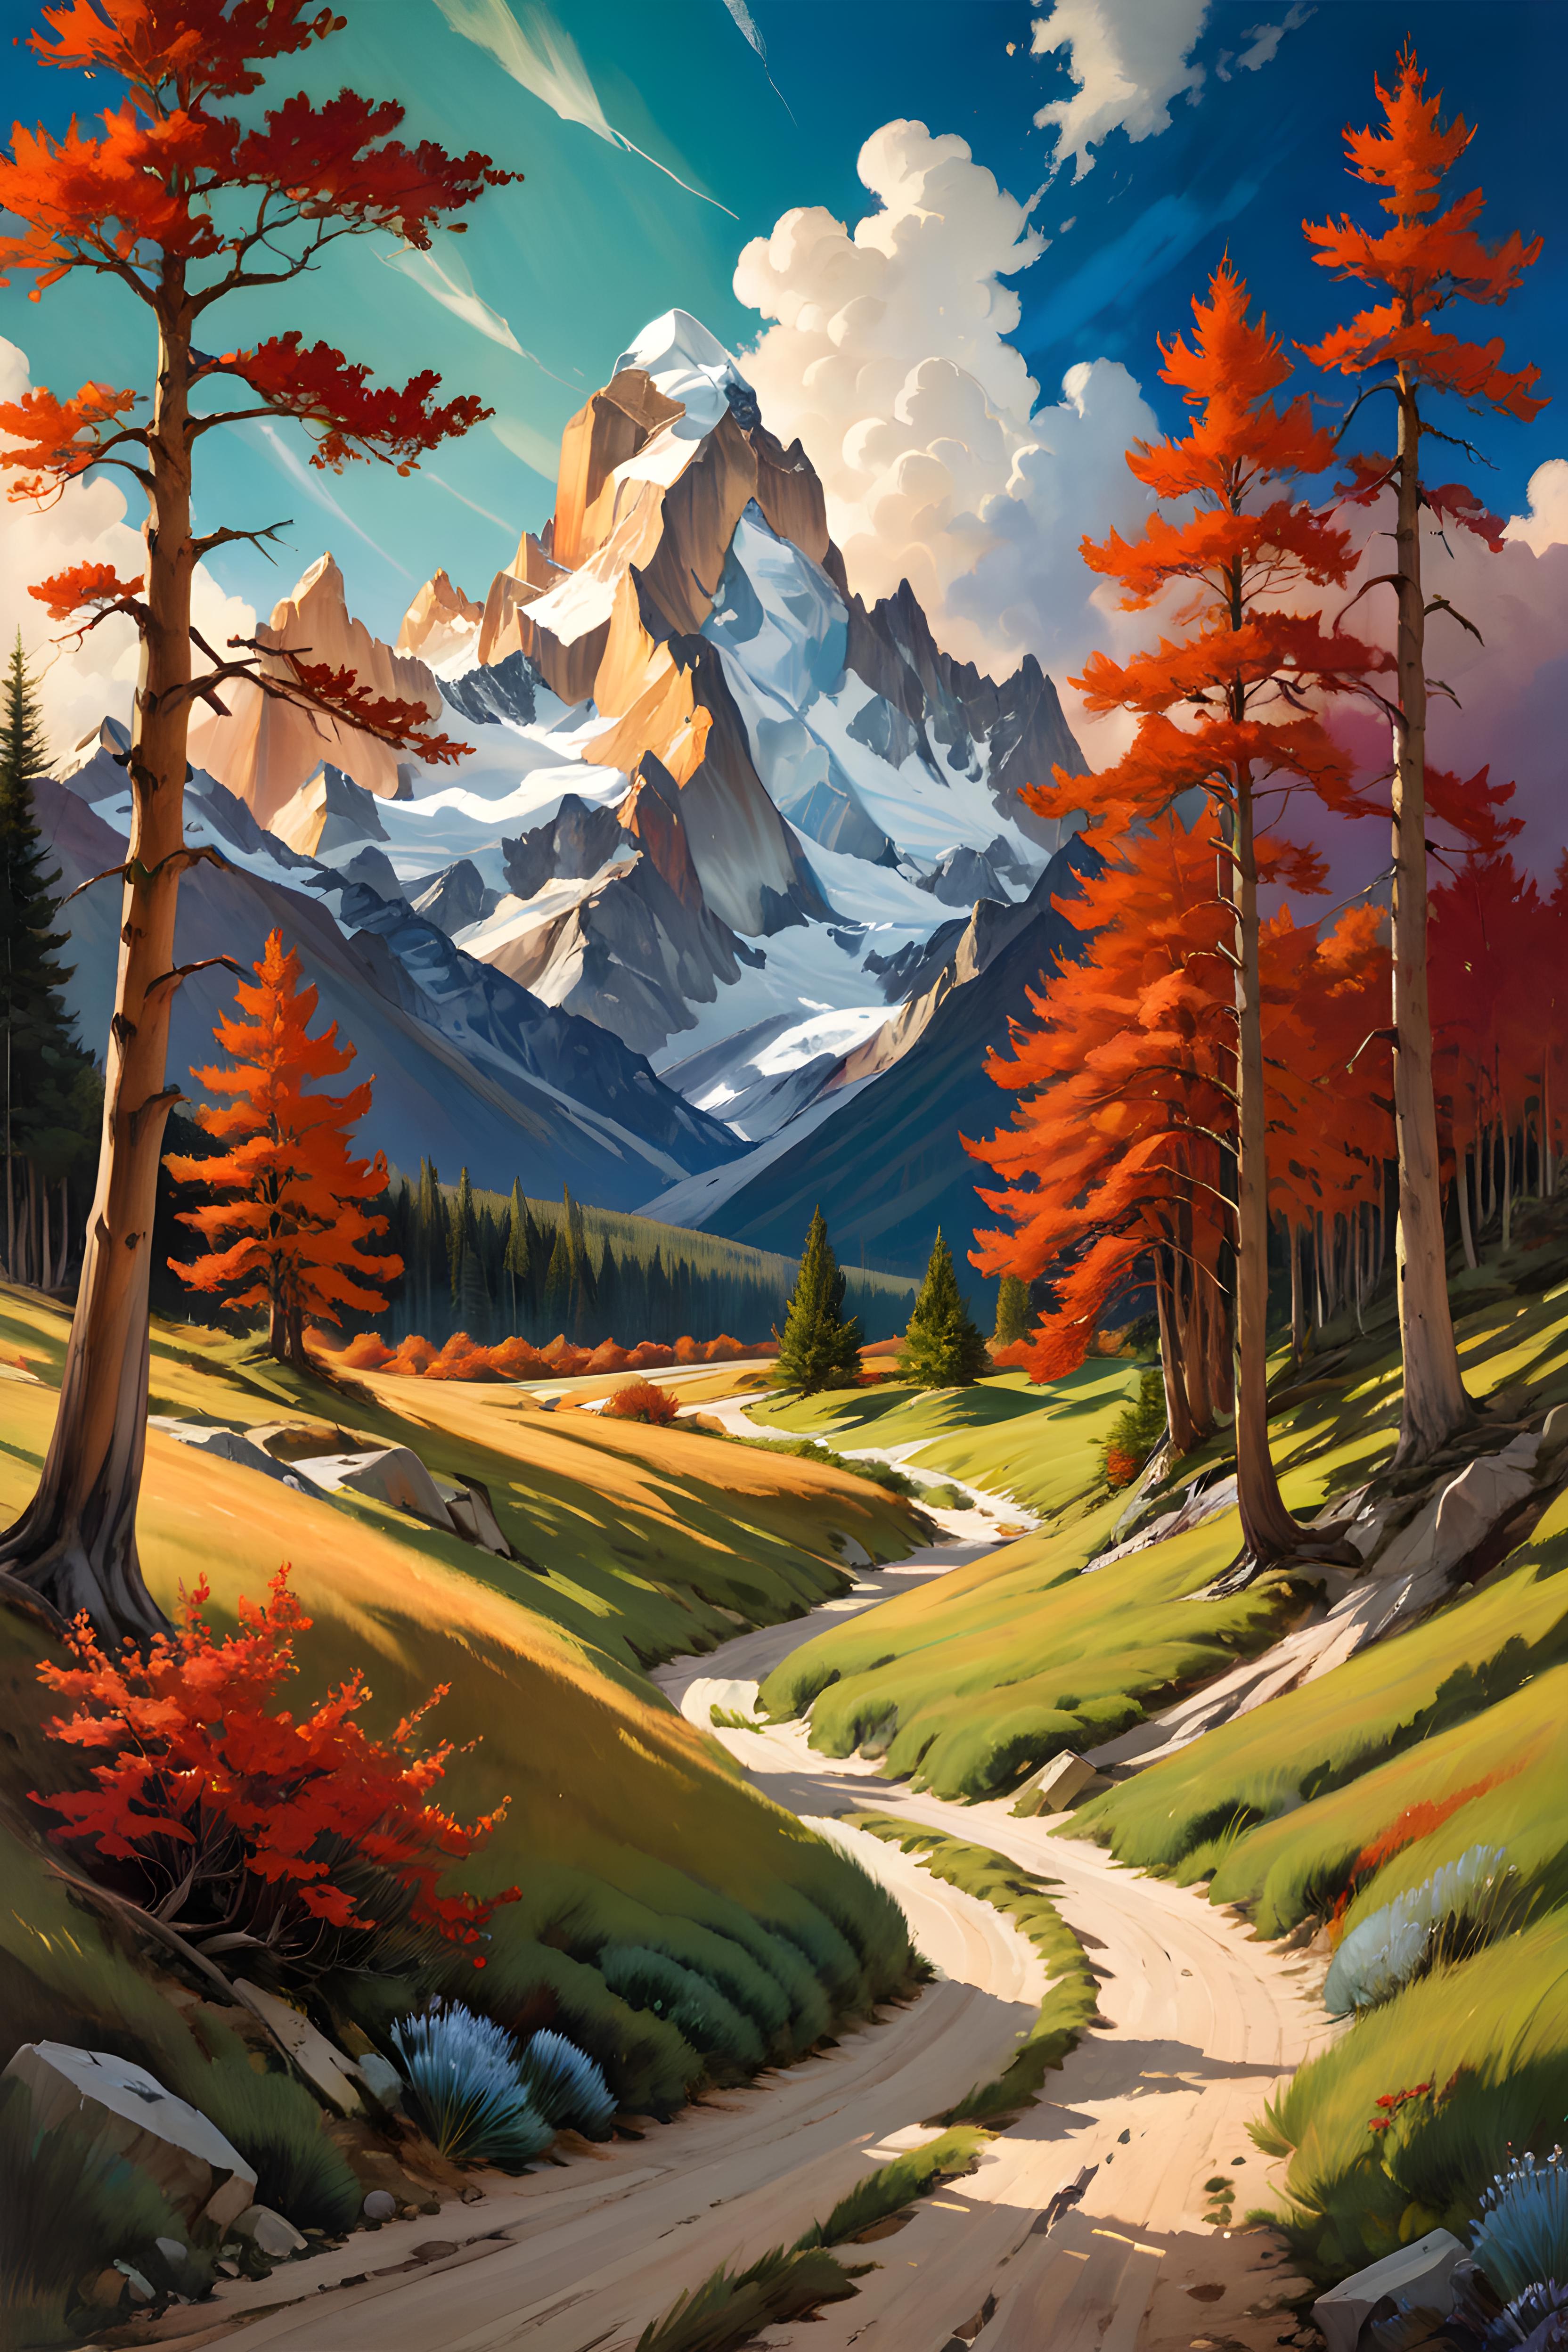 A Painting of a Path Through a Forest with Snow-Capped Mountains in the Background